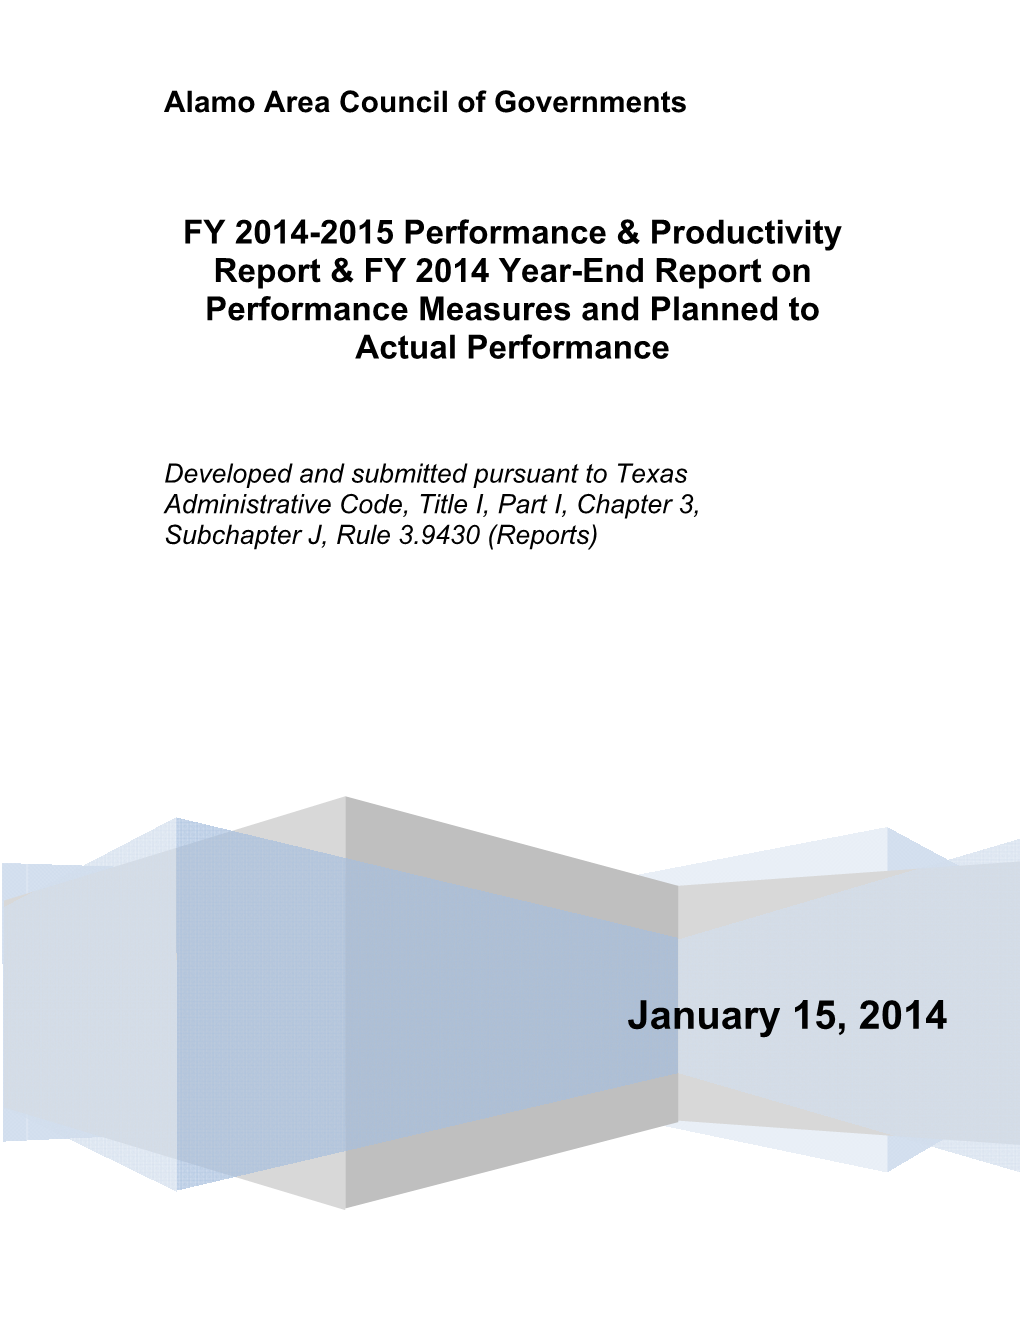 2014-2015 Performance & Productivity Report & FY 2014 Year-End Report on Performance Measures and Planned to Actual Performance